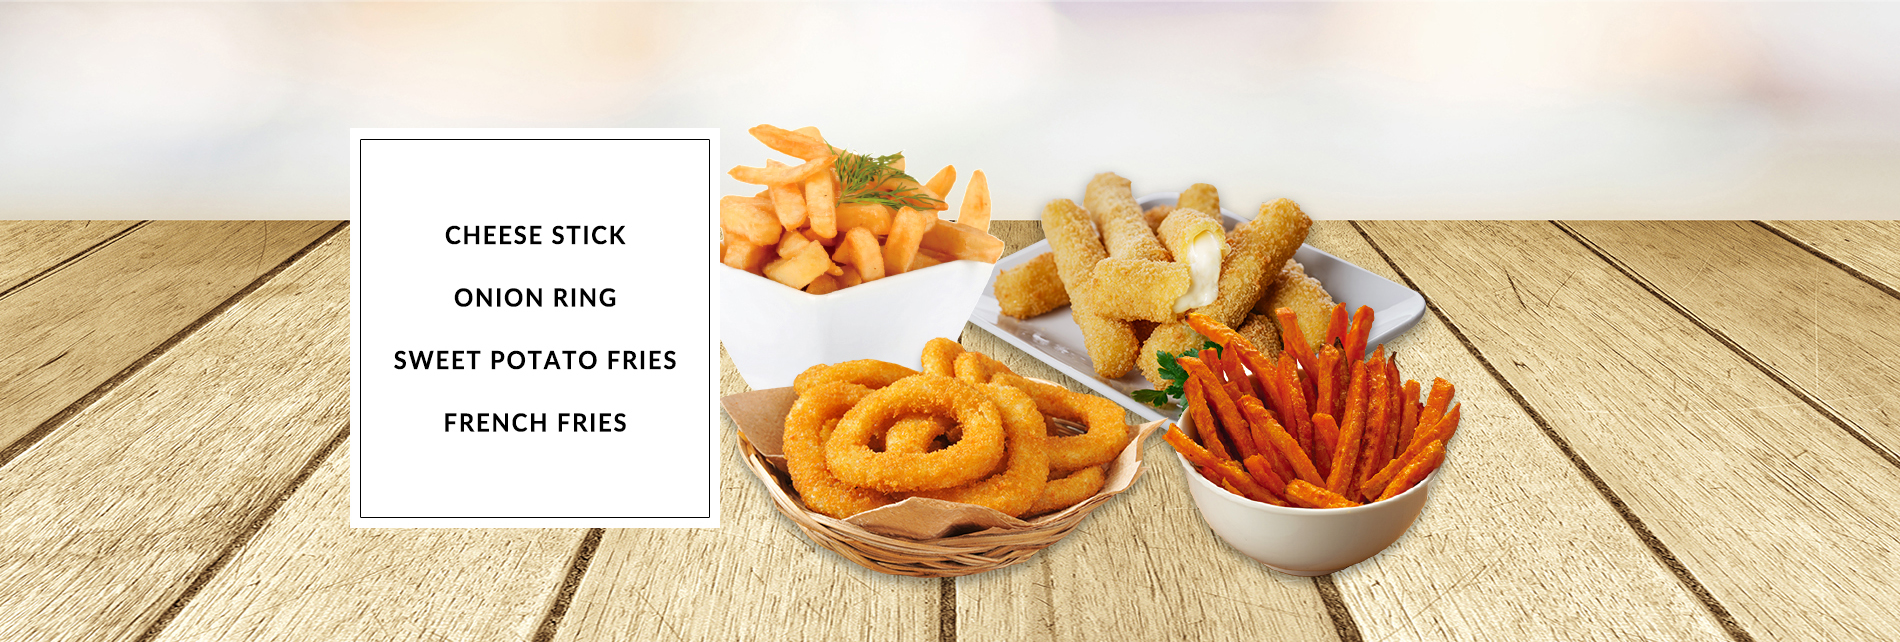 cheese stick, onion ring, sweet potato fries, french fries